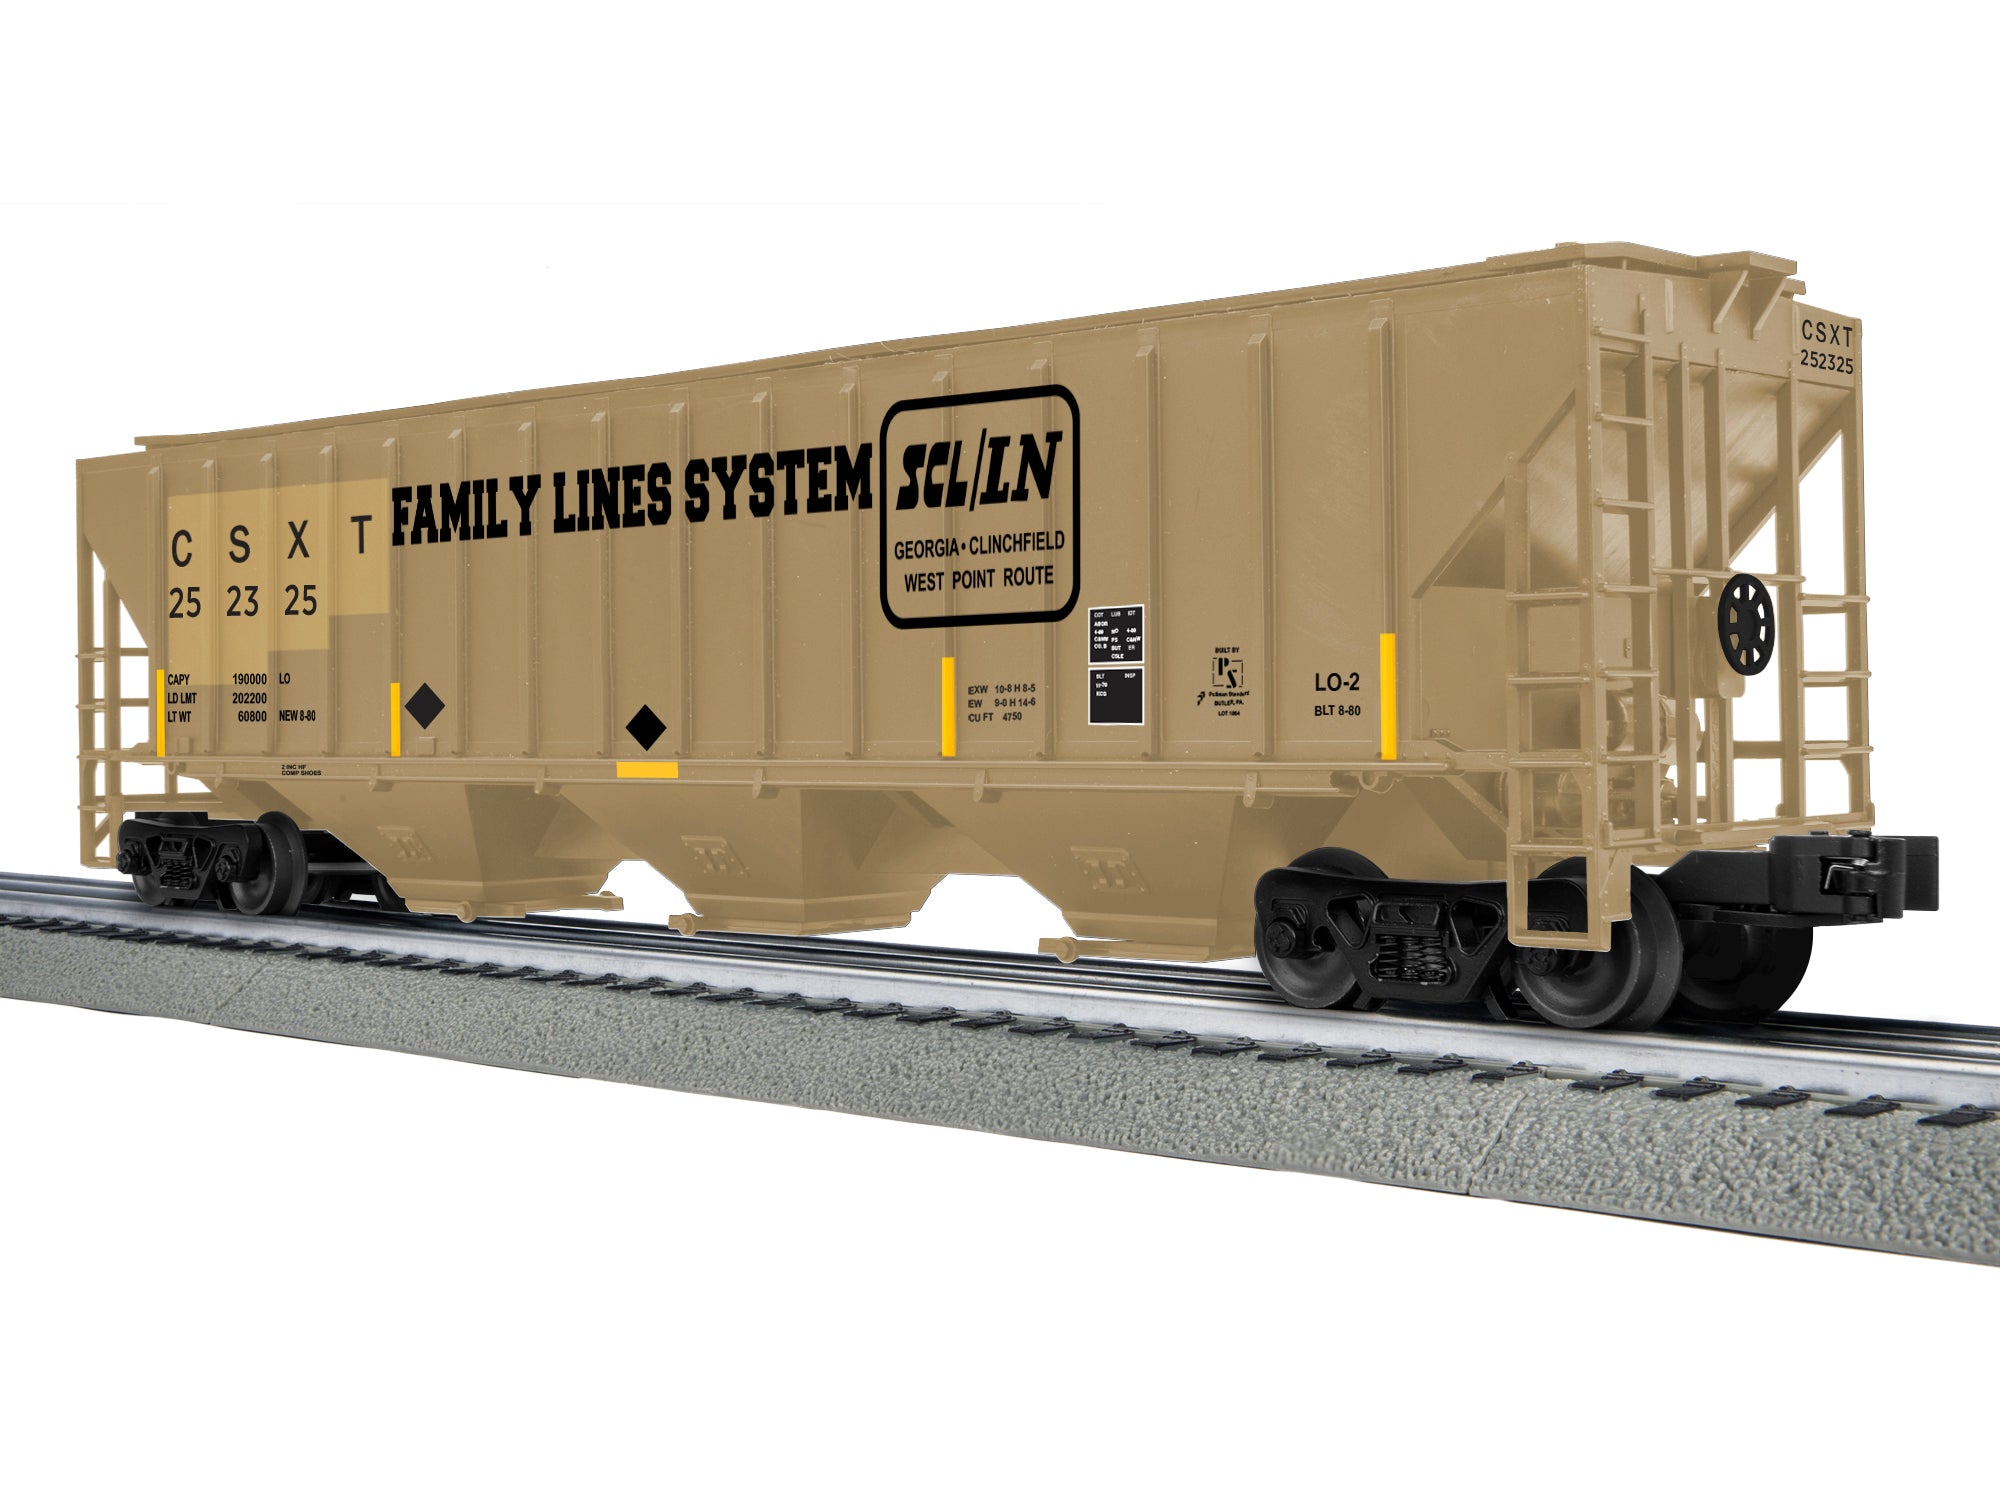 Lionel 2442159 - PS-2CD Covered Hopper "CSX" #252325 (Family Lines)